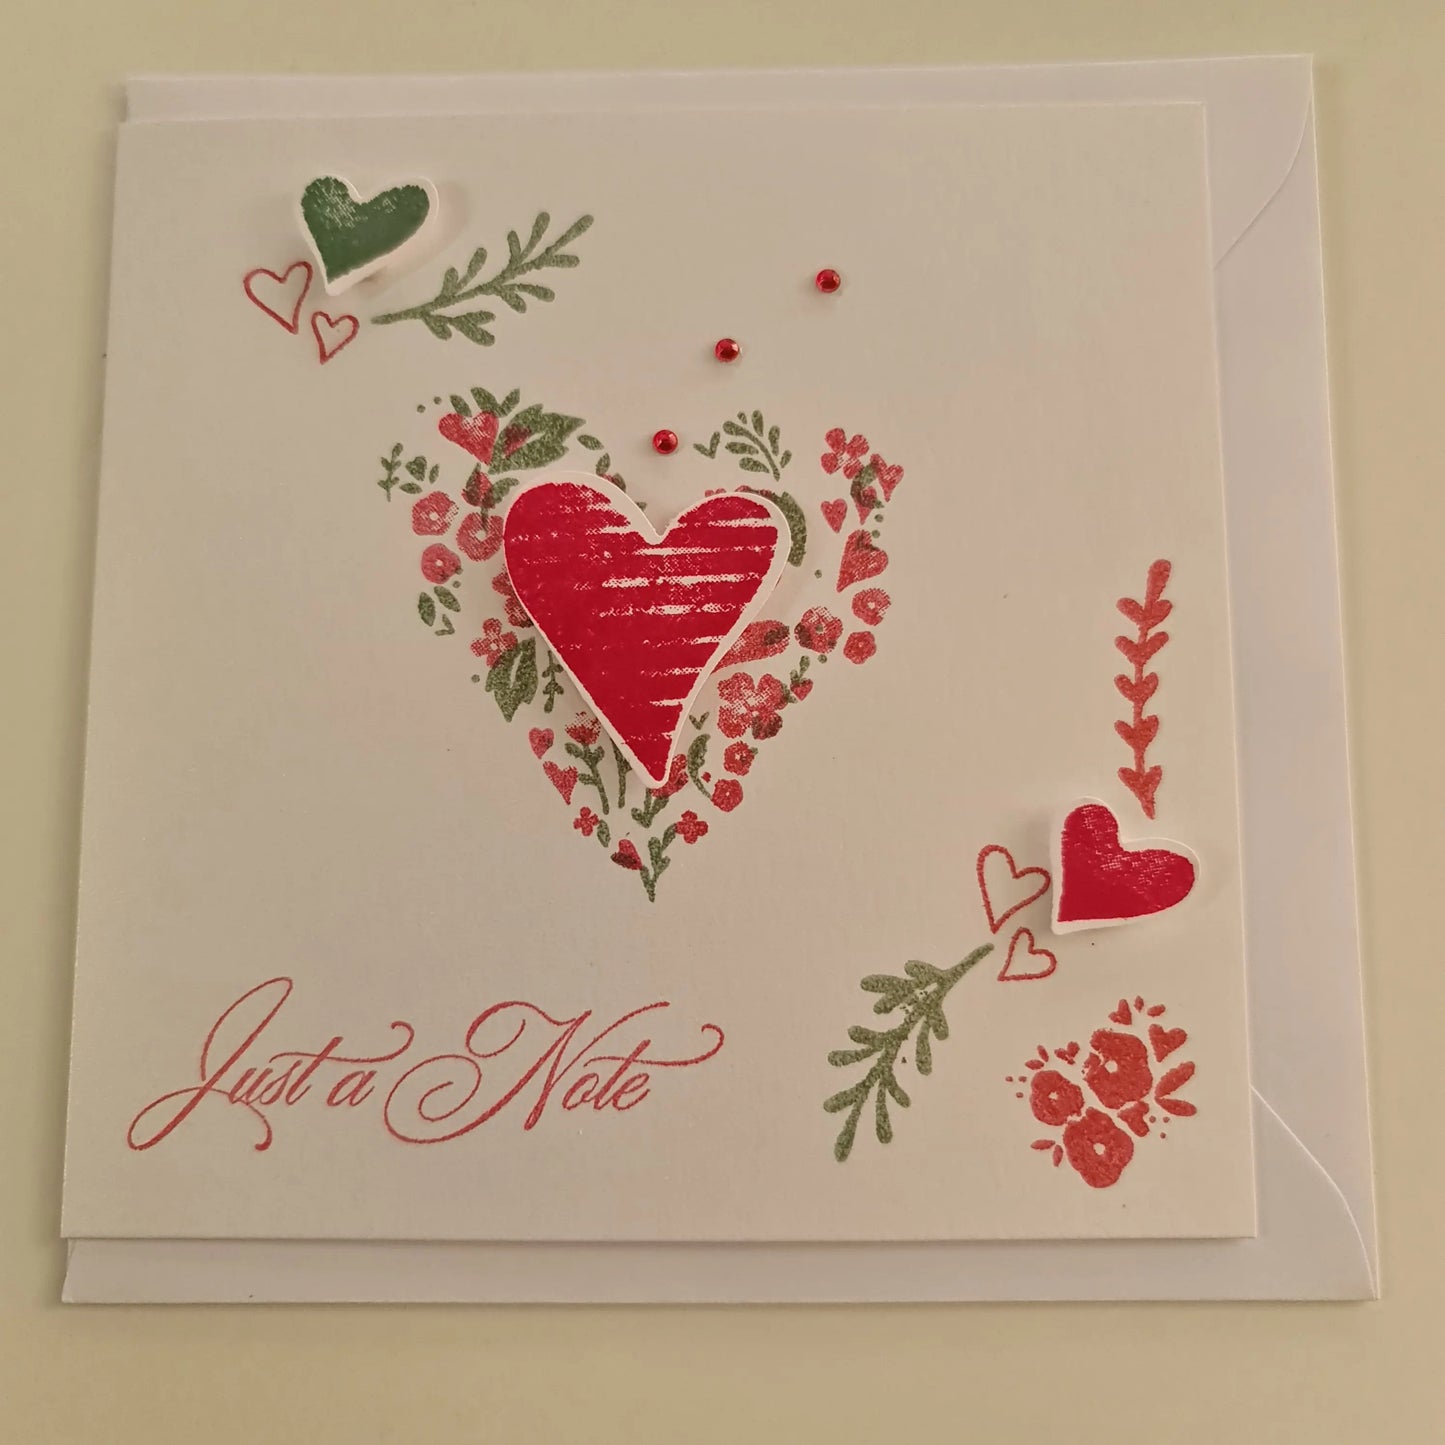 Just a Note - Hearts Card Paper Love Cards